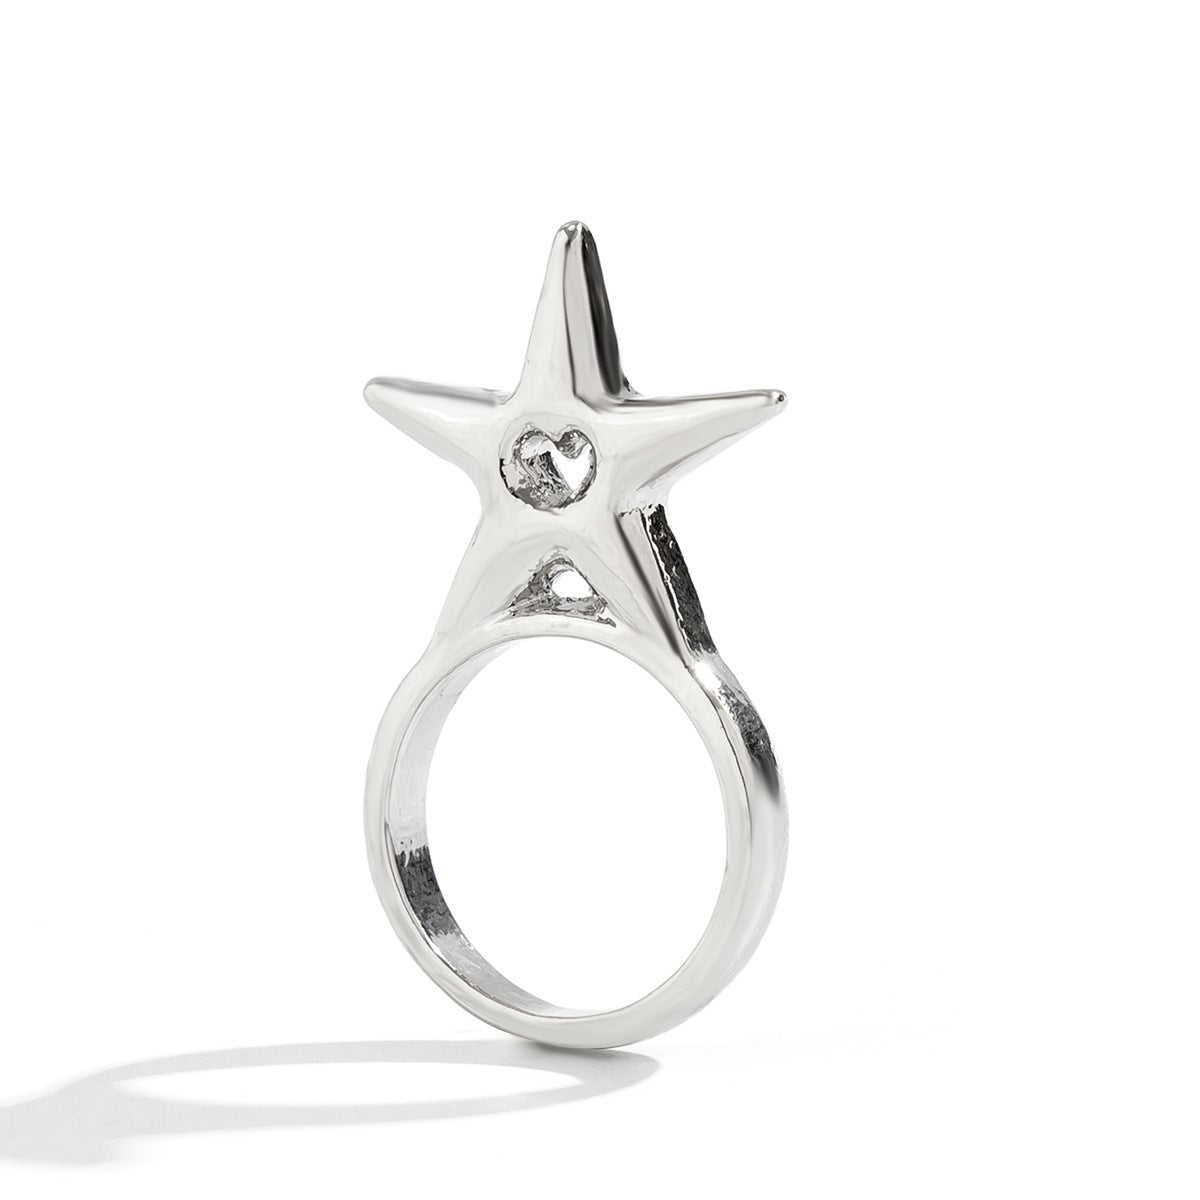 Niche Three-dimensional Star Ring Opening